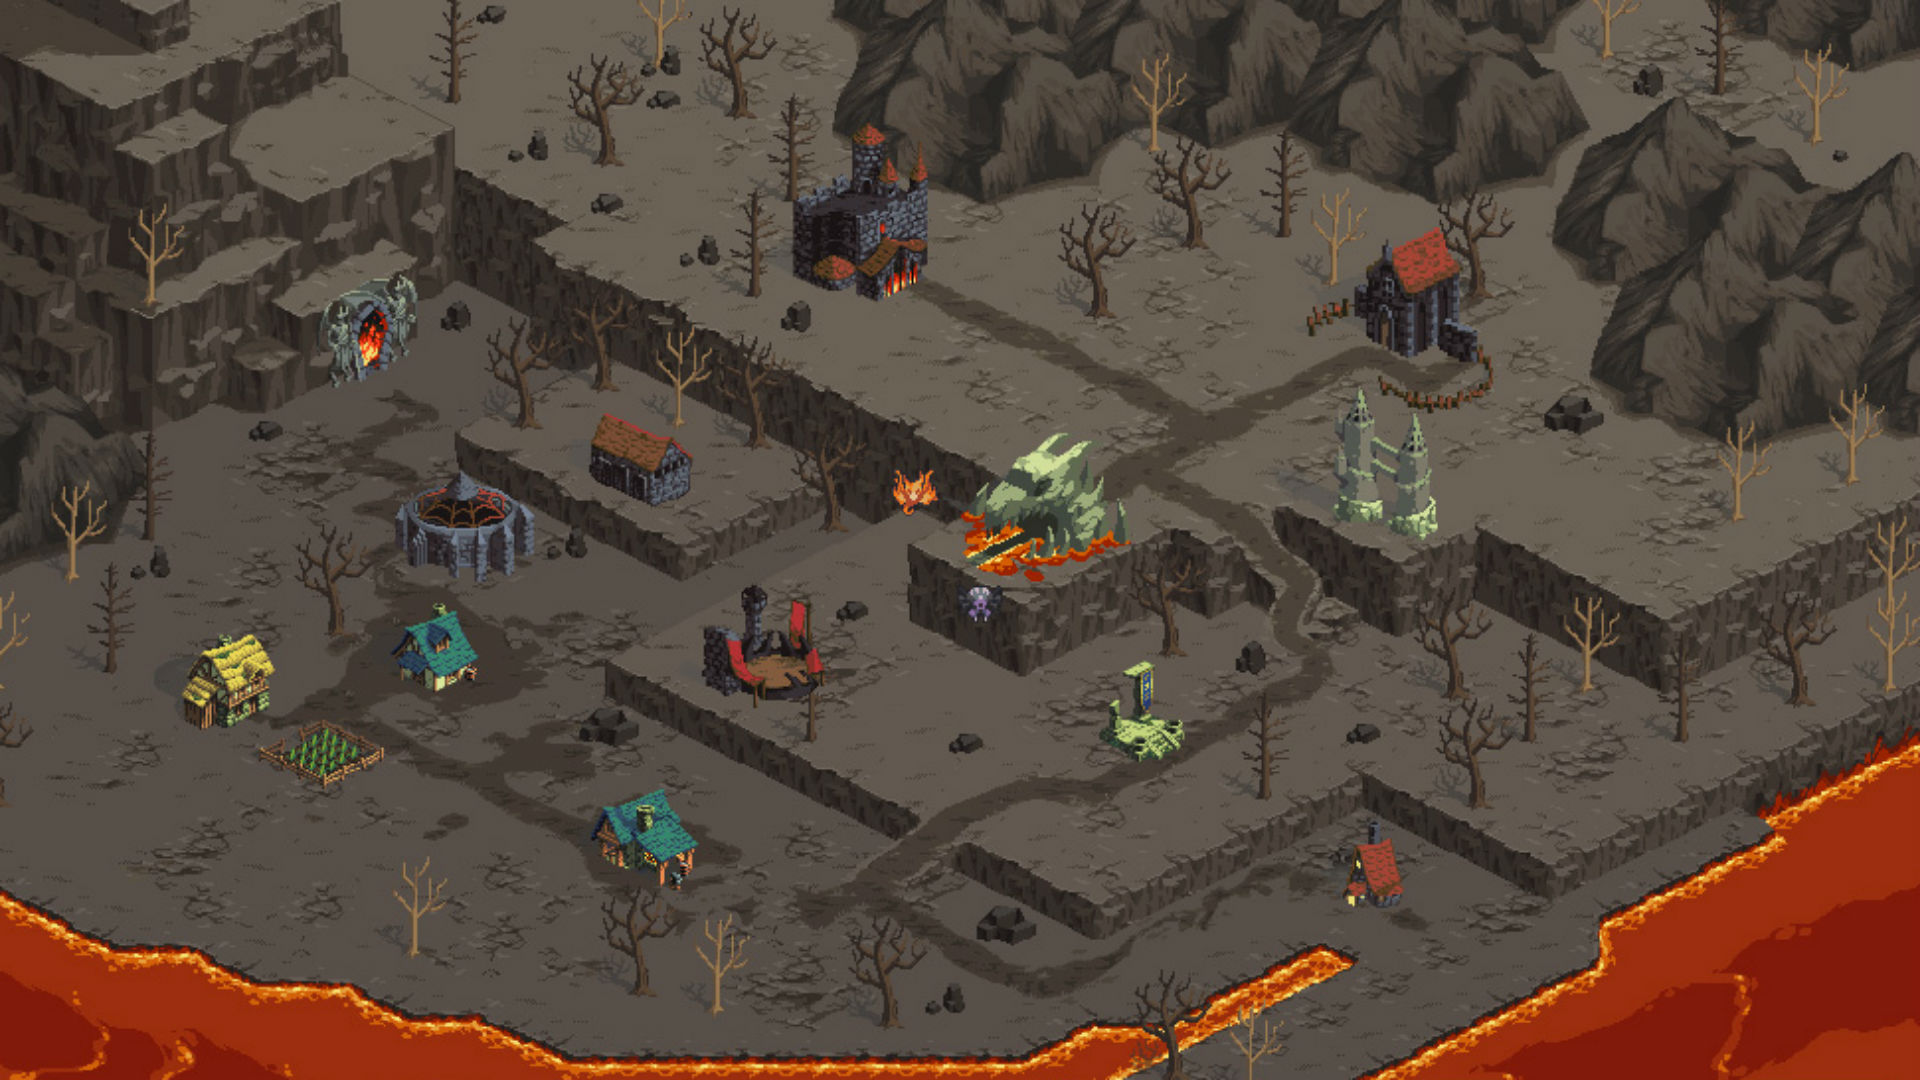 Best clicker games: Realm Grinder. Image shows a stony wasteland filled with bones and lava.